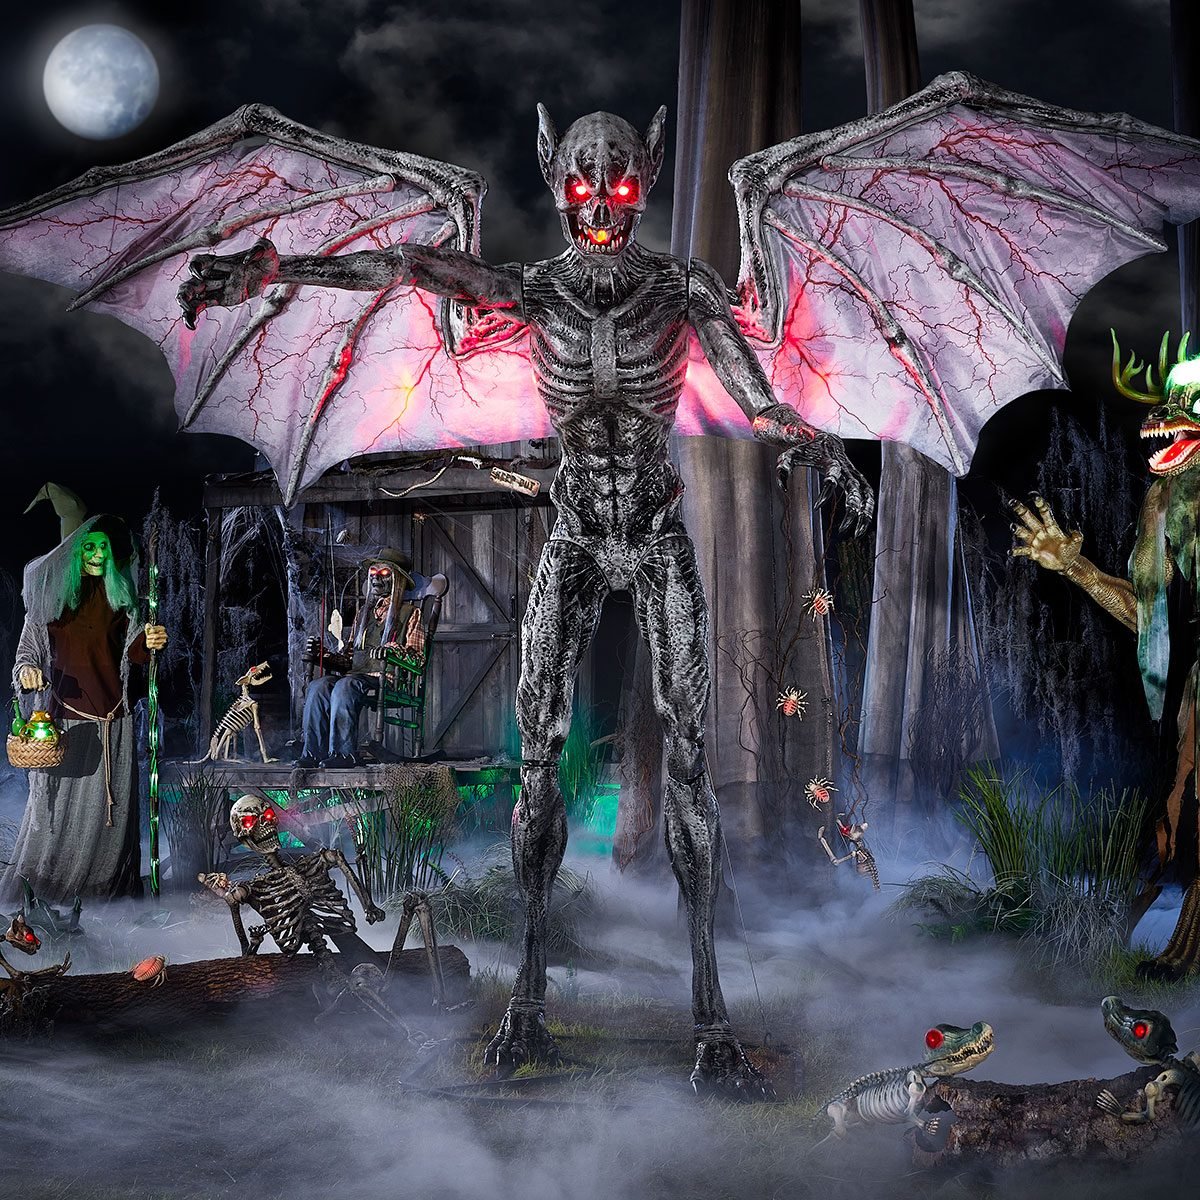 Home Depot Canada Adds Massive Halloween Decorations in Stores as